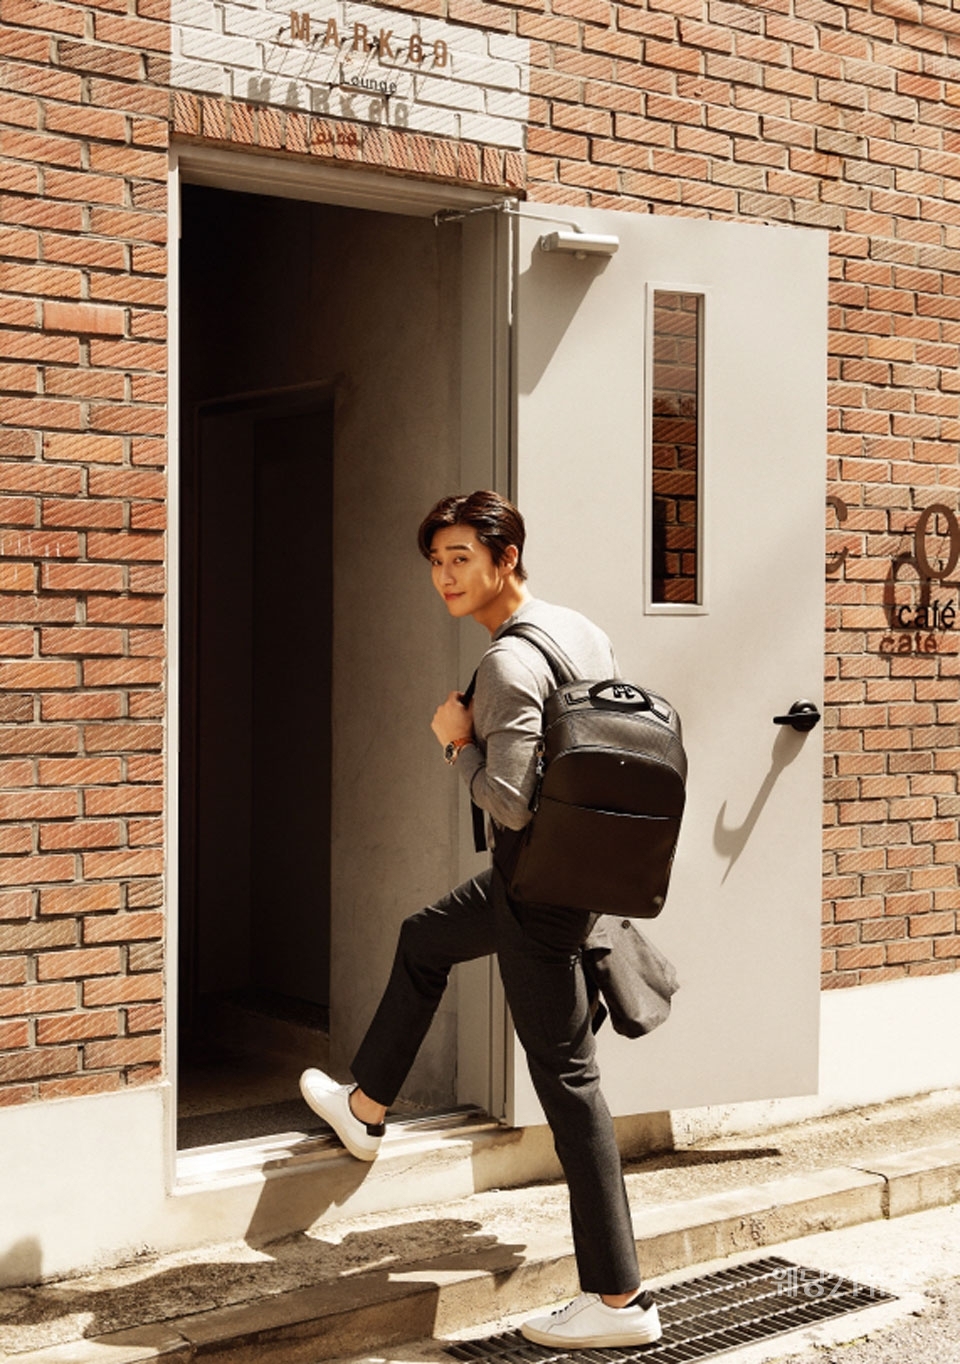 Luxury business lifestyle brand Montblanc has unveiled a picture with its brand Model Park Seo-joon.In this photo, which was under the concept of City Traveler, Park Seo-joon wore a variety of Montblanc products such as trolley and backpack, and completely refined the city and sophisticated style.Park Seo-joon in the public picture showed a variety of autumn looks such as trench coats, jackets, knits, etc., and showed Montblancs #MY4810 Nightflight Trolley, Extreme 2.0 Backpack and Nightflight Backpack, showing practical and trendy fashion that can be used for travel. # MY4810 Nightflight Trolley is a collection created for Travelers in City who leave Travel for business trips or relaxation. It is a product that boasts ultra-light and durability using high-performance silver polycarbonate material. It is also advantageous to divide space more and to store luggage efficiently without separate pouches. You can choose six sizes depending on the capacity of the medium large size. The Extreme 2.0 backpack is a luxurious and practical use of carbon fiber print leather.It is a good product to produce fashionable daily bag because it can be used in everyday life as well as office look with sophisticated design. This picture is a product that can be used in various trolleys and leather products of Montblanc for Smart City Travel with Model Park Seo-joon. Montblanc products have excellent utilization as well as style, so they can be used in various ways in everyday life as well as Travel. City and sophisticated style Montblancs Park Seo-joon picture can be seen in the special edition of Style Chosun in September.Montblancs trolley, backpack to showcase Smart Travelzoo lifestyle